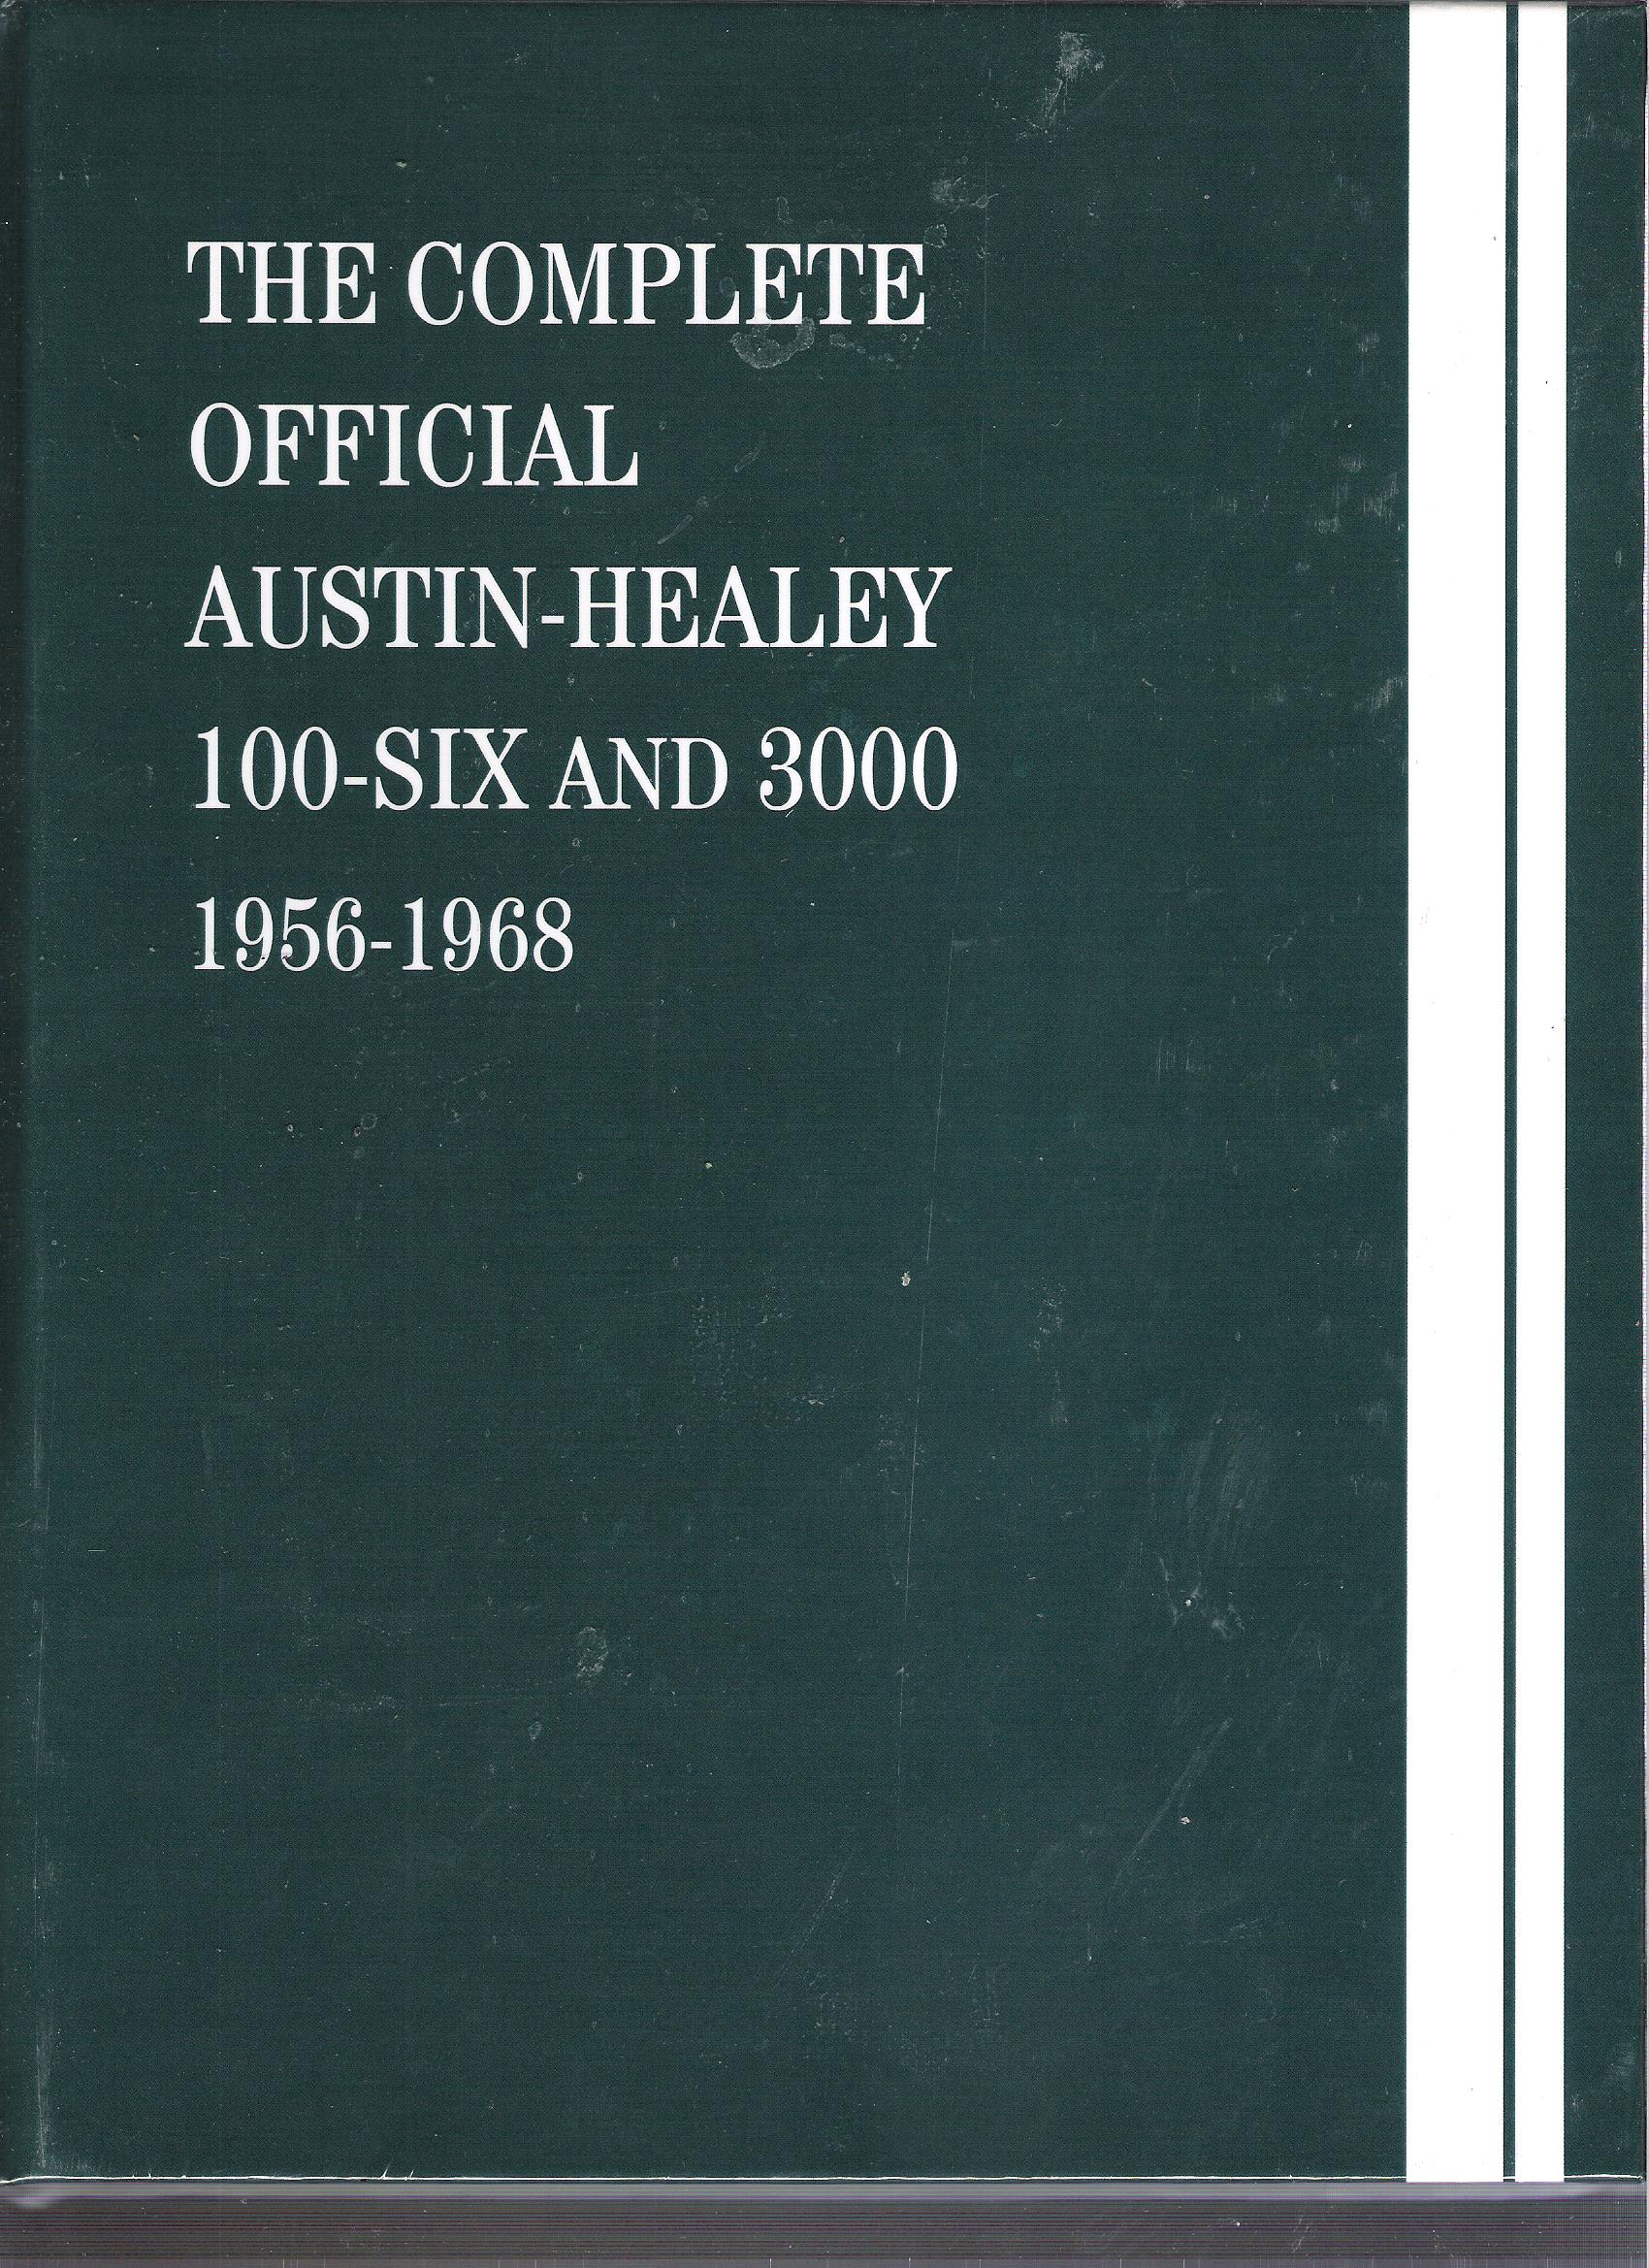 1956 - 1968 The Complete Official Austin-Healey 100-SIX and 3000 Service Manual